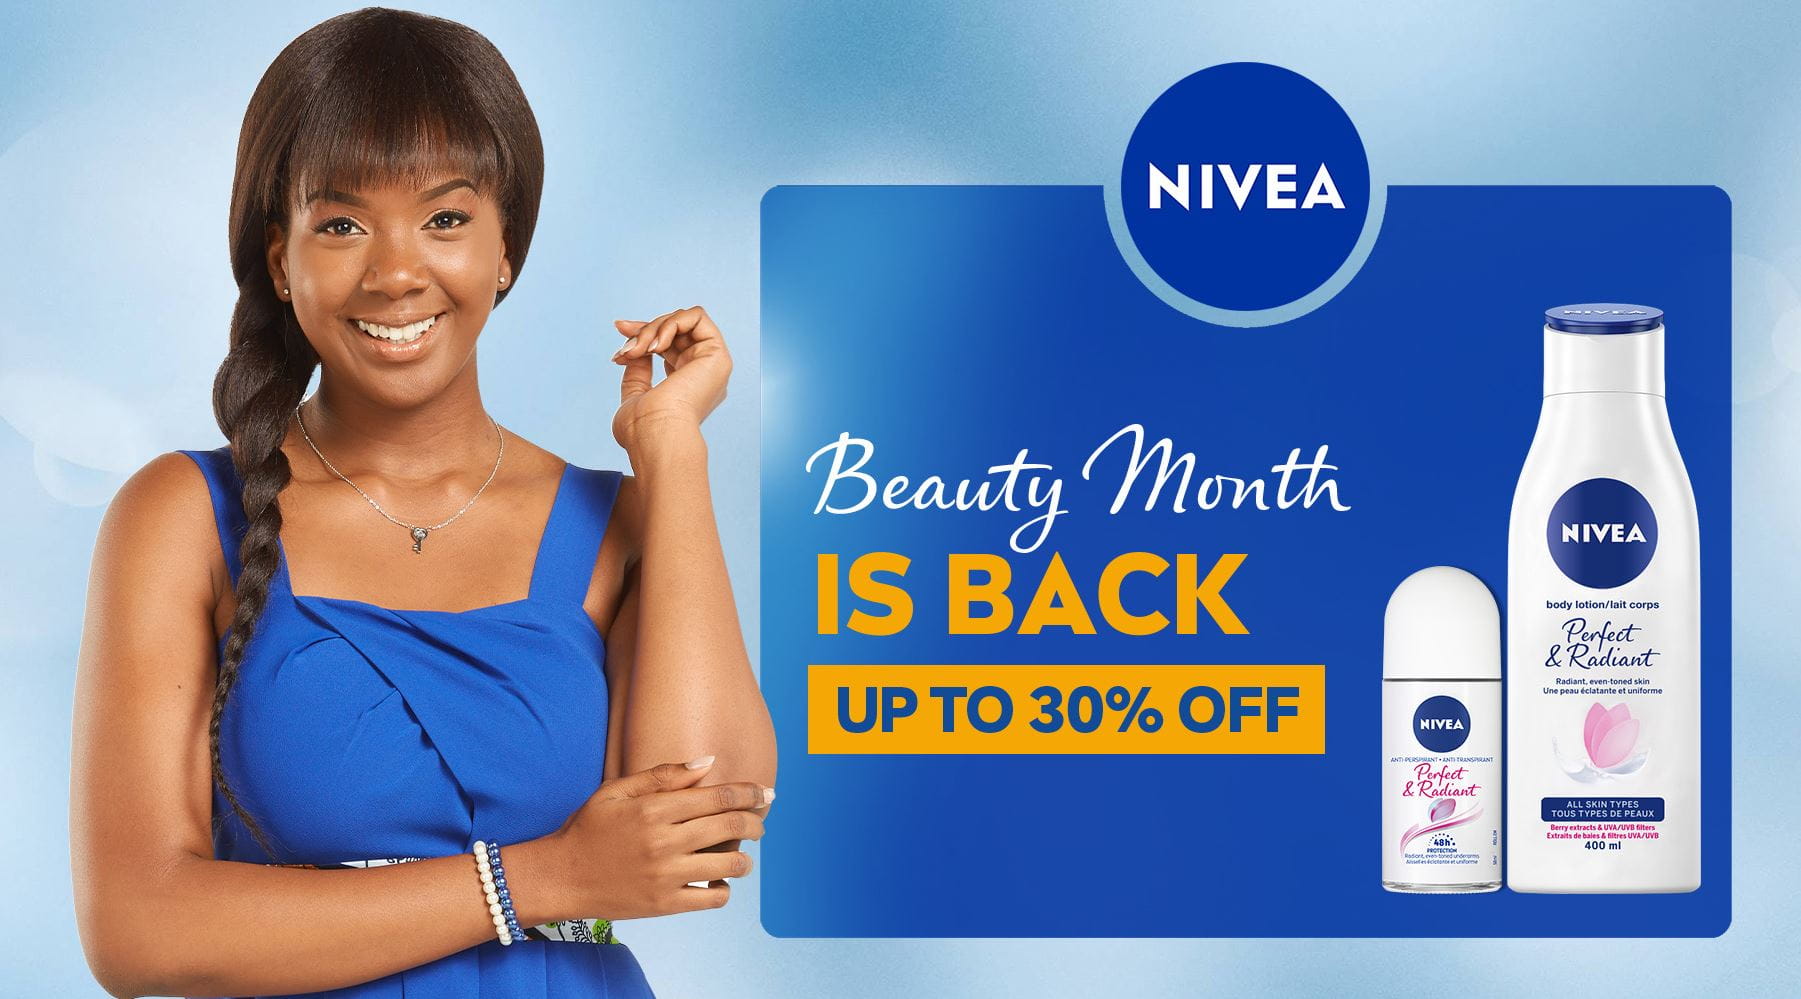 30% off! Beauty Month is Back!